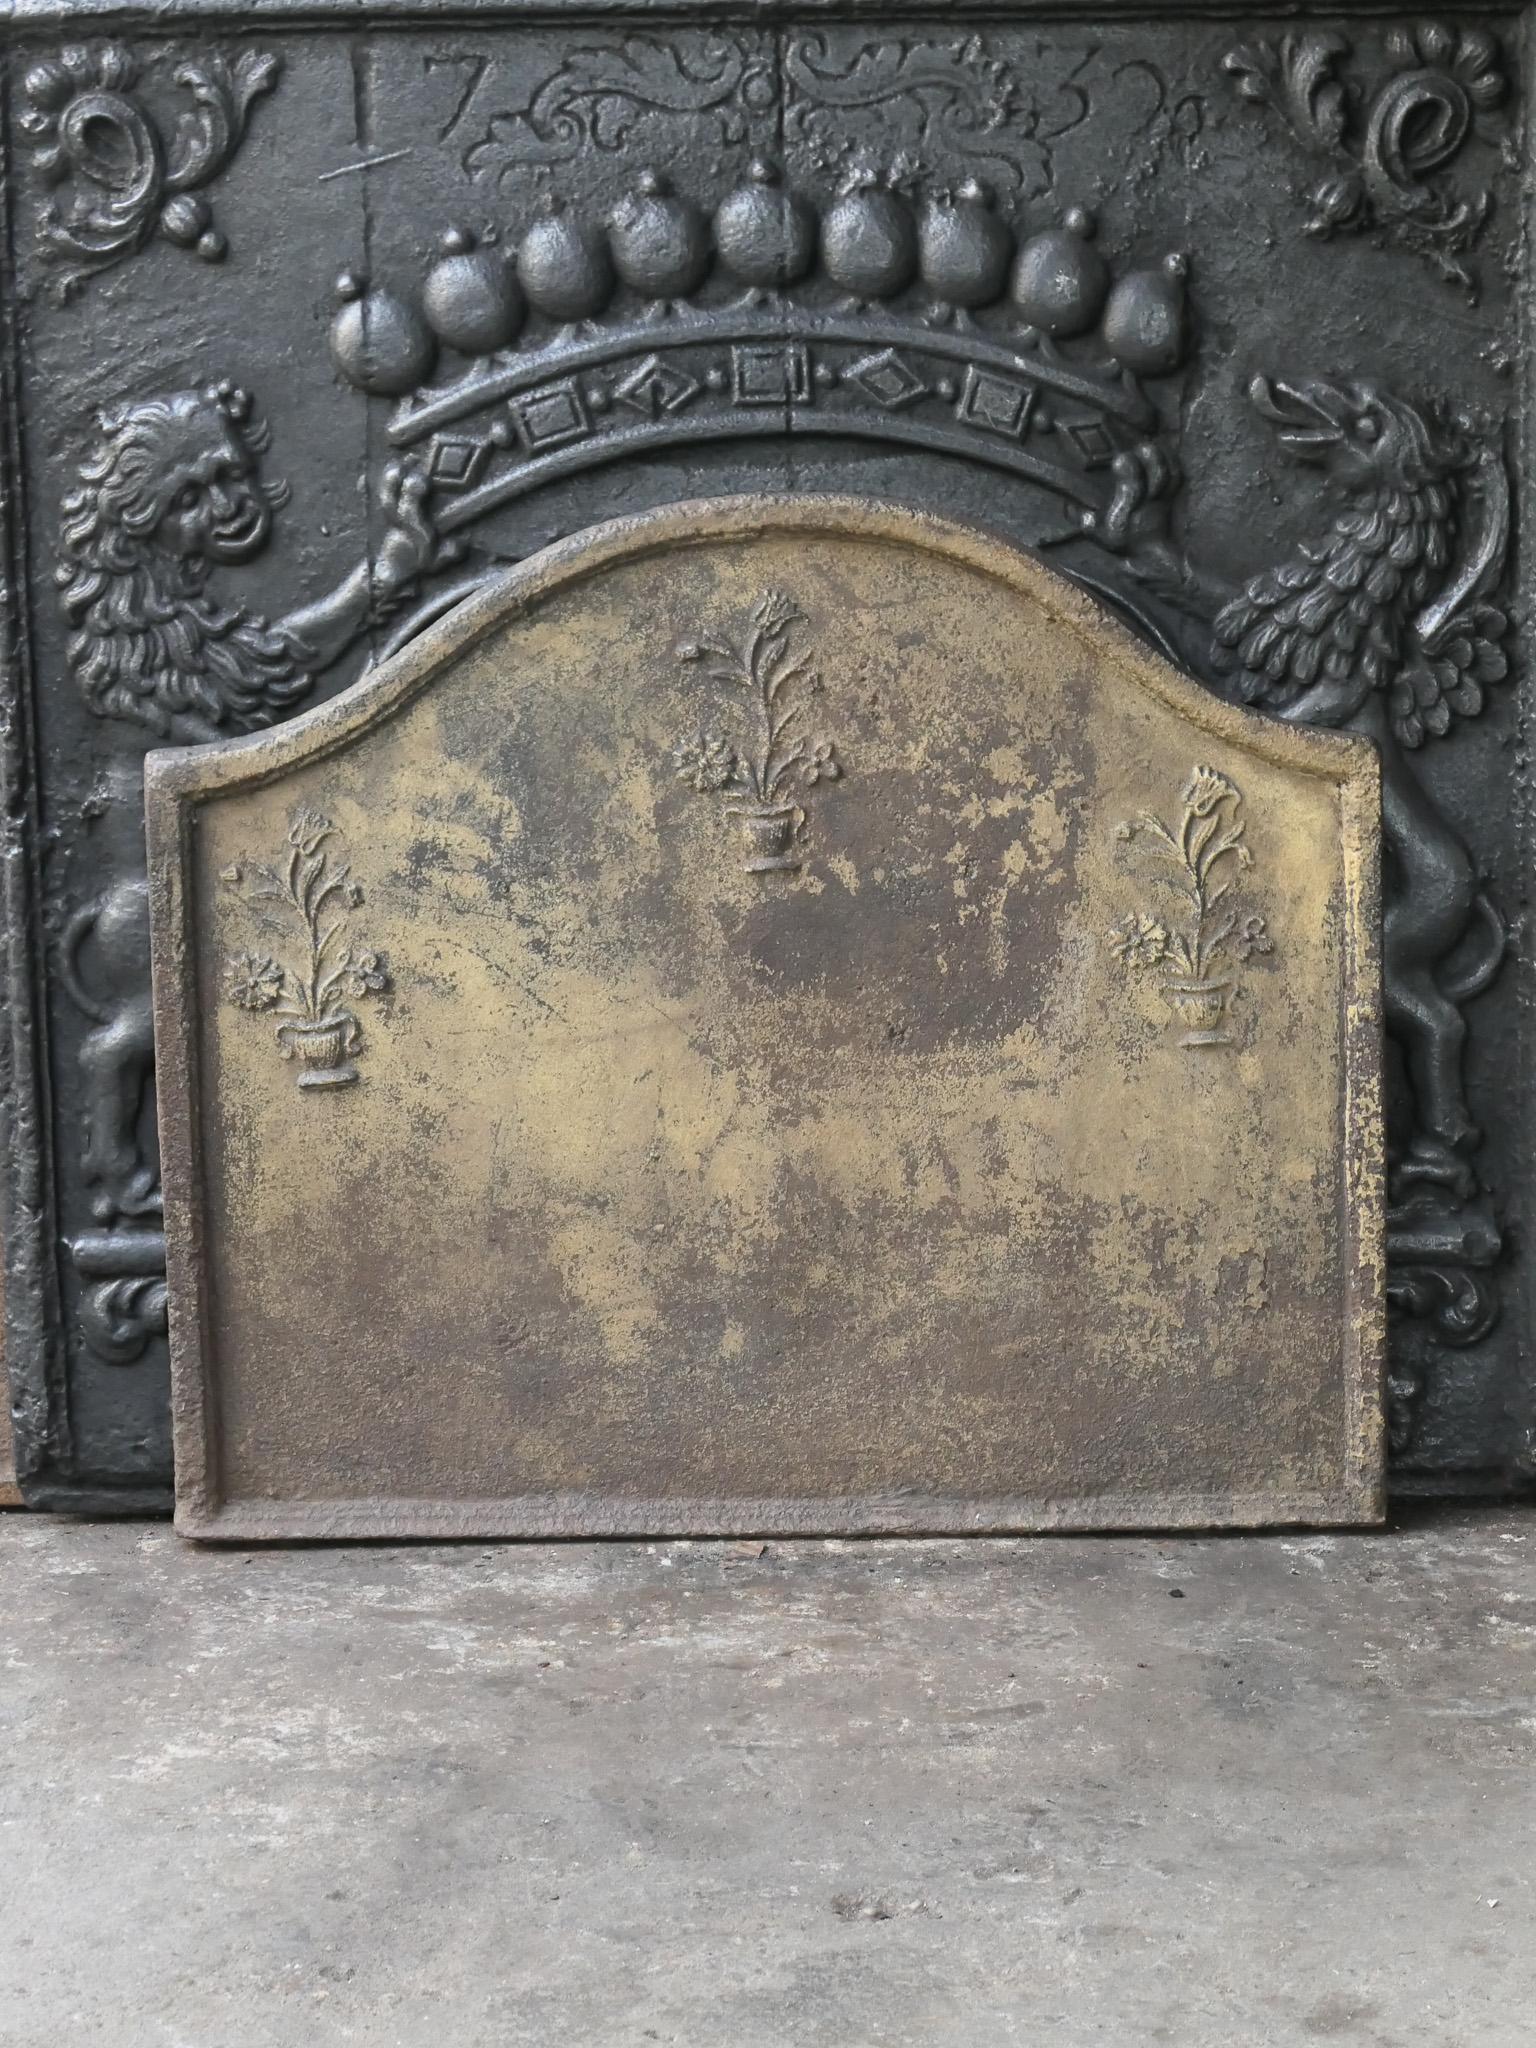 18th century French Louis XV period fireback. The decoration consists of three flower pots.

The fireback has a natural brown patina. Upon request it can be made black / pewter colored at no extra cost. The fireback is in a good condition and does